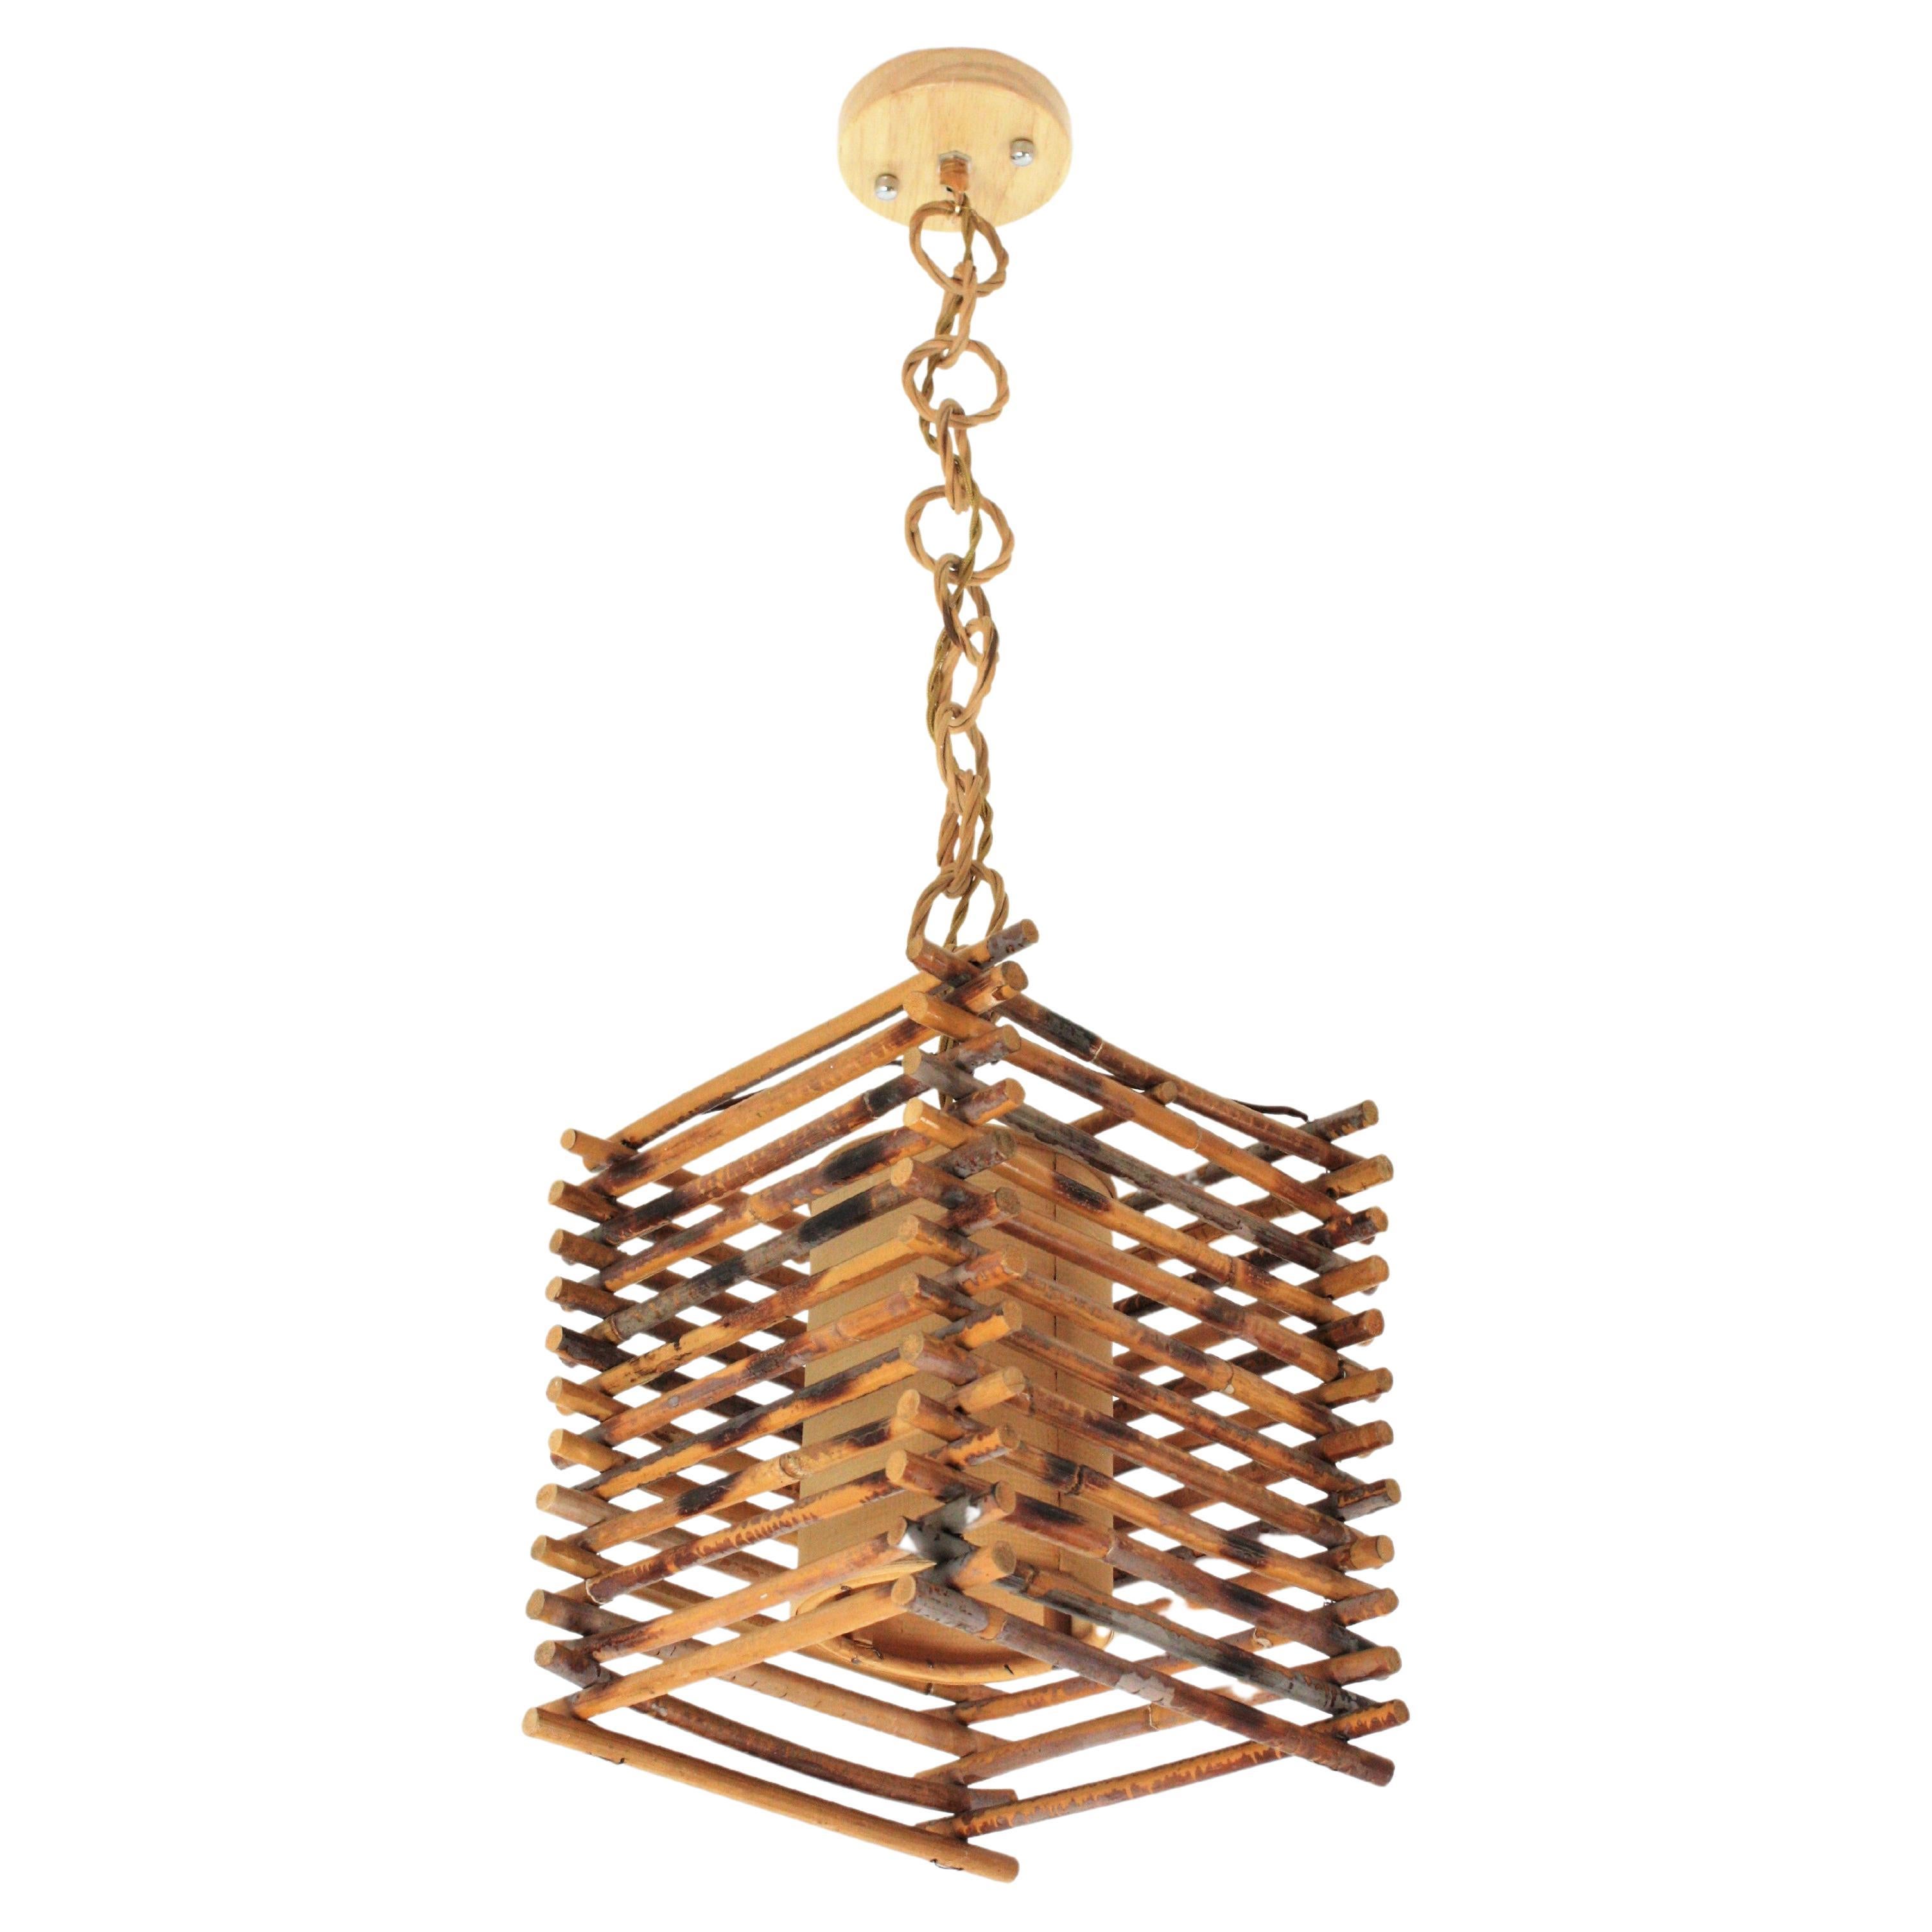 French Rattan Lantern Pendant with Chinoiserie Accents